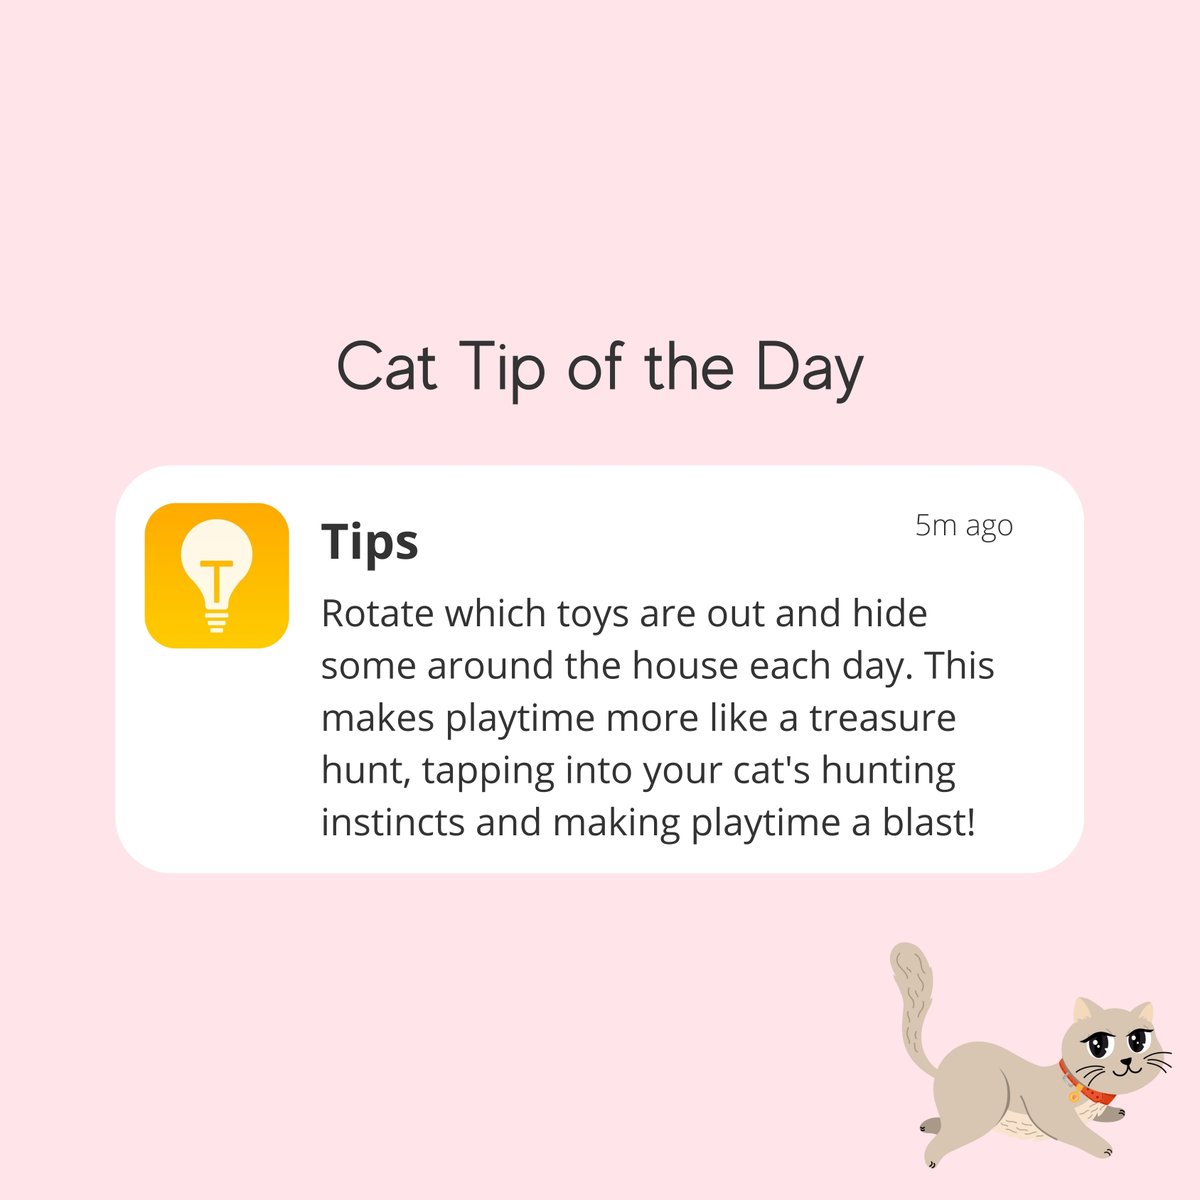 Always remember that you cat is a wild predator 😼

Follow ✅ for more Cat Tip of the Day 💡

#catvibes #cutecats #catpower #funnycat #catcare #catlover #kittymeme #catmeme #cathealth #catsbeingcats #catinsurance #everypaw #petinsurance #everypawuk #everypawpetinsurance